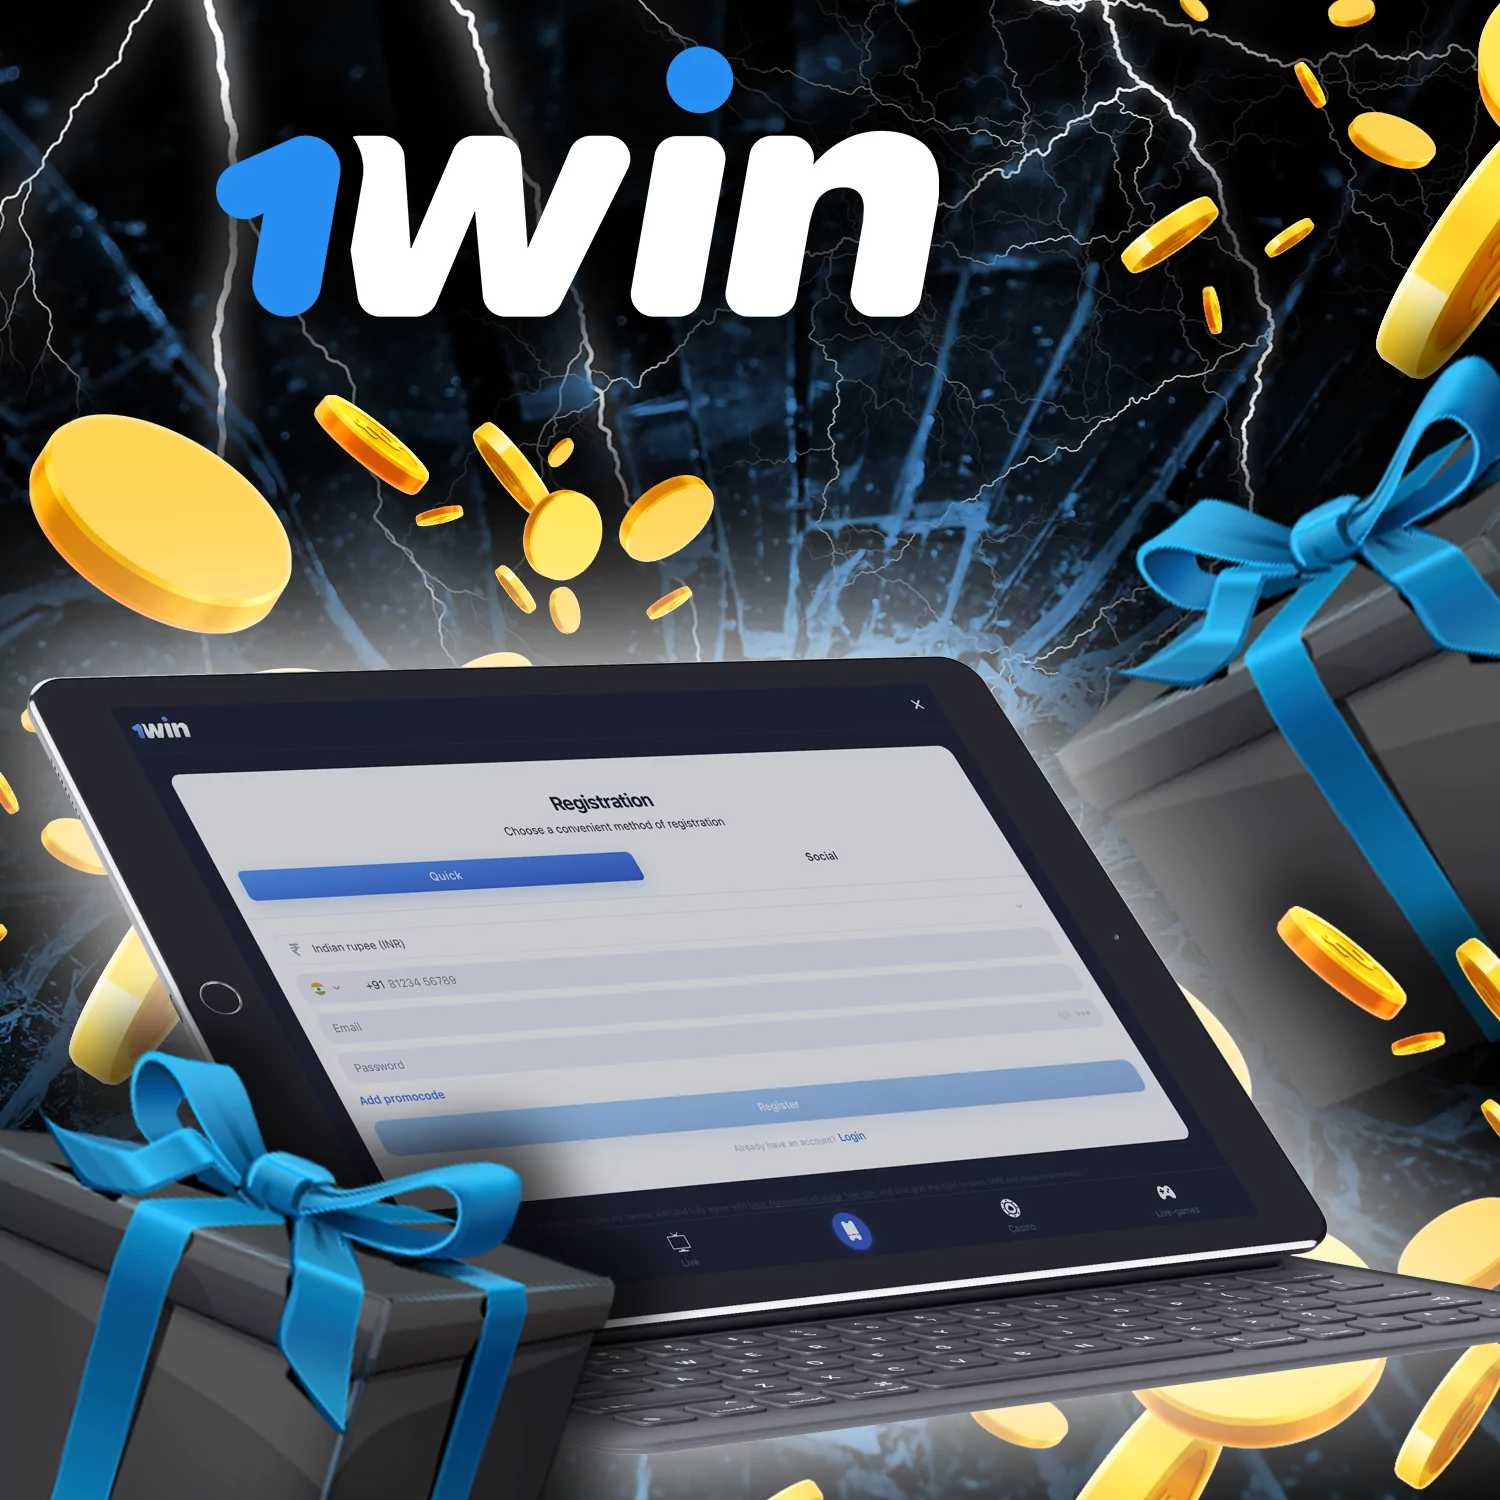 To get the welcome bonus 1win you need to make your first deposit.